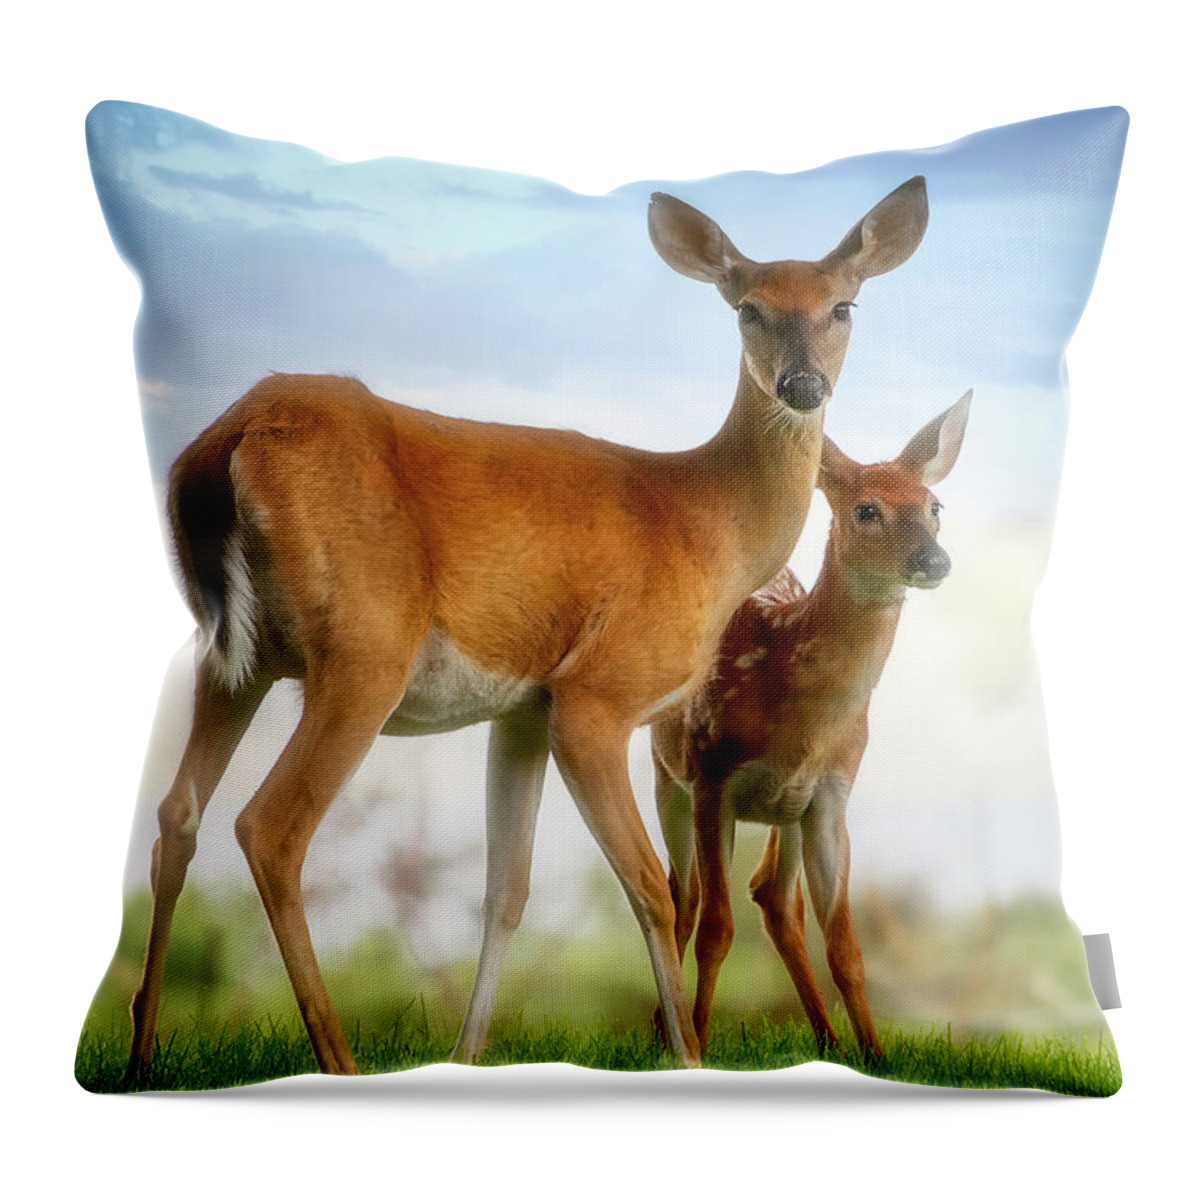 Deer Throw Pillow featuring the photograph Oh, Deer, Let's Pose... by Shelia Hunt